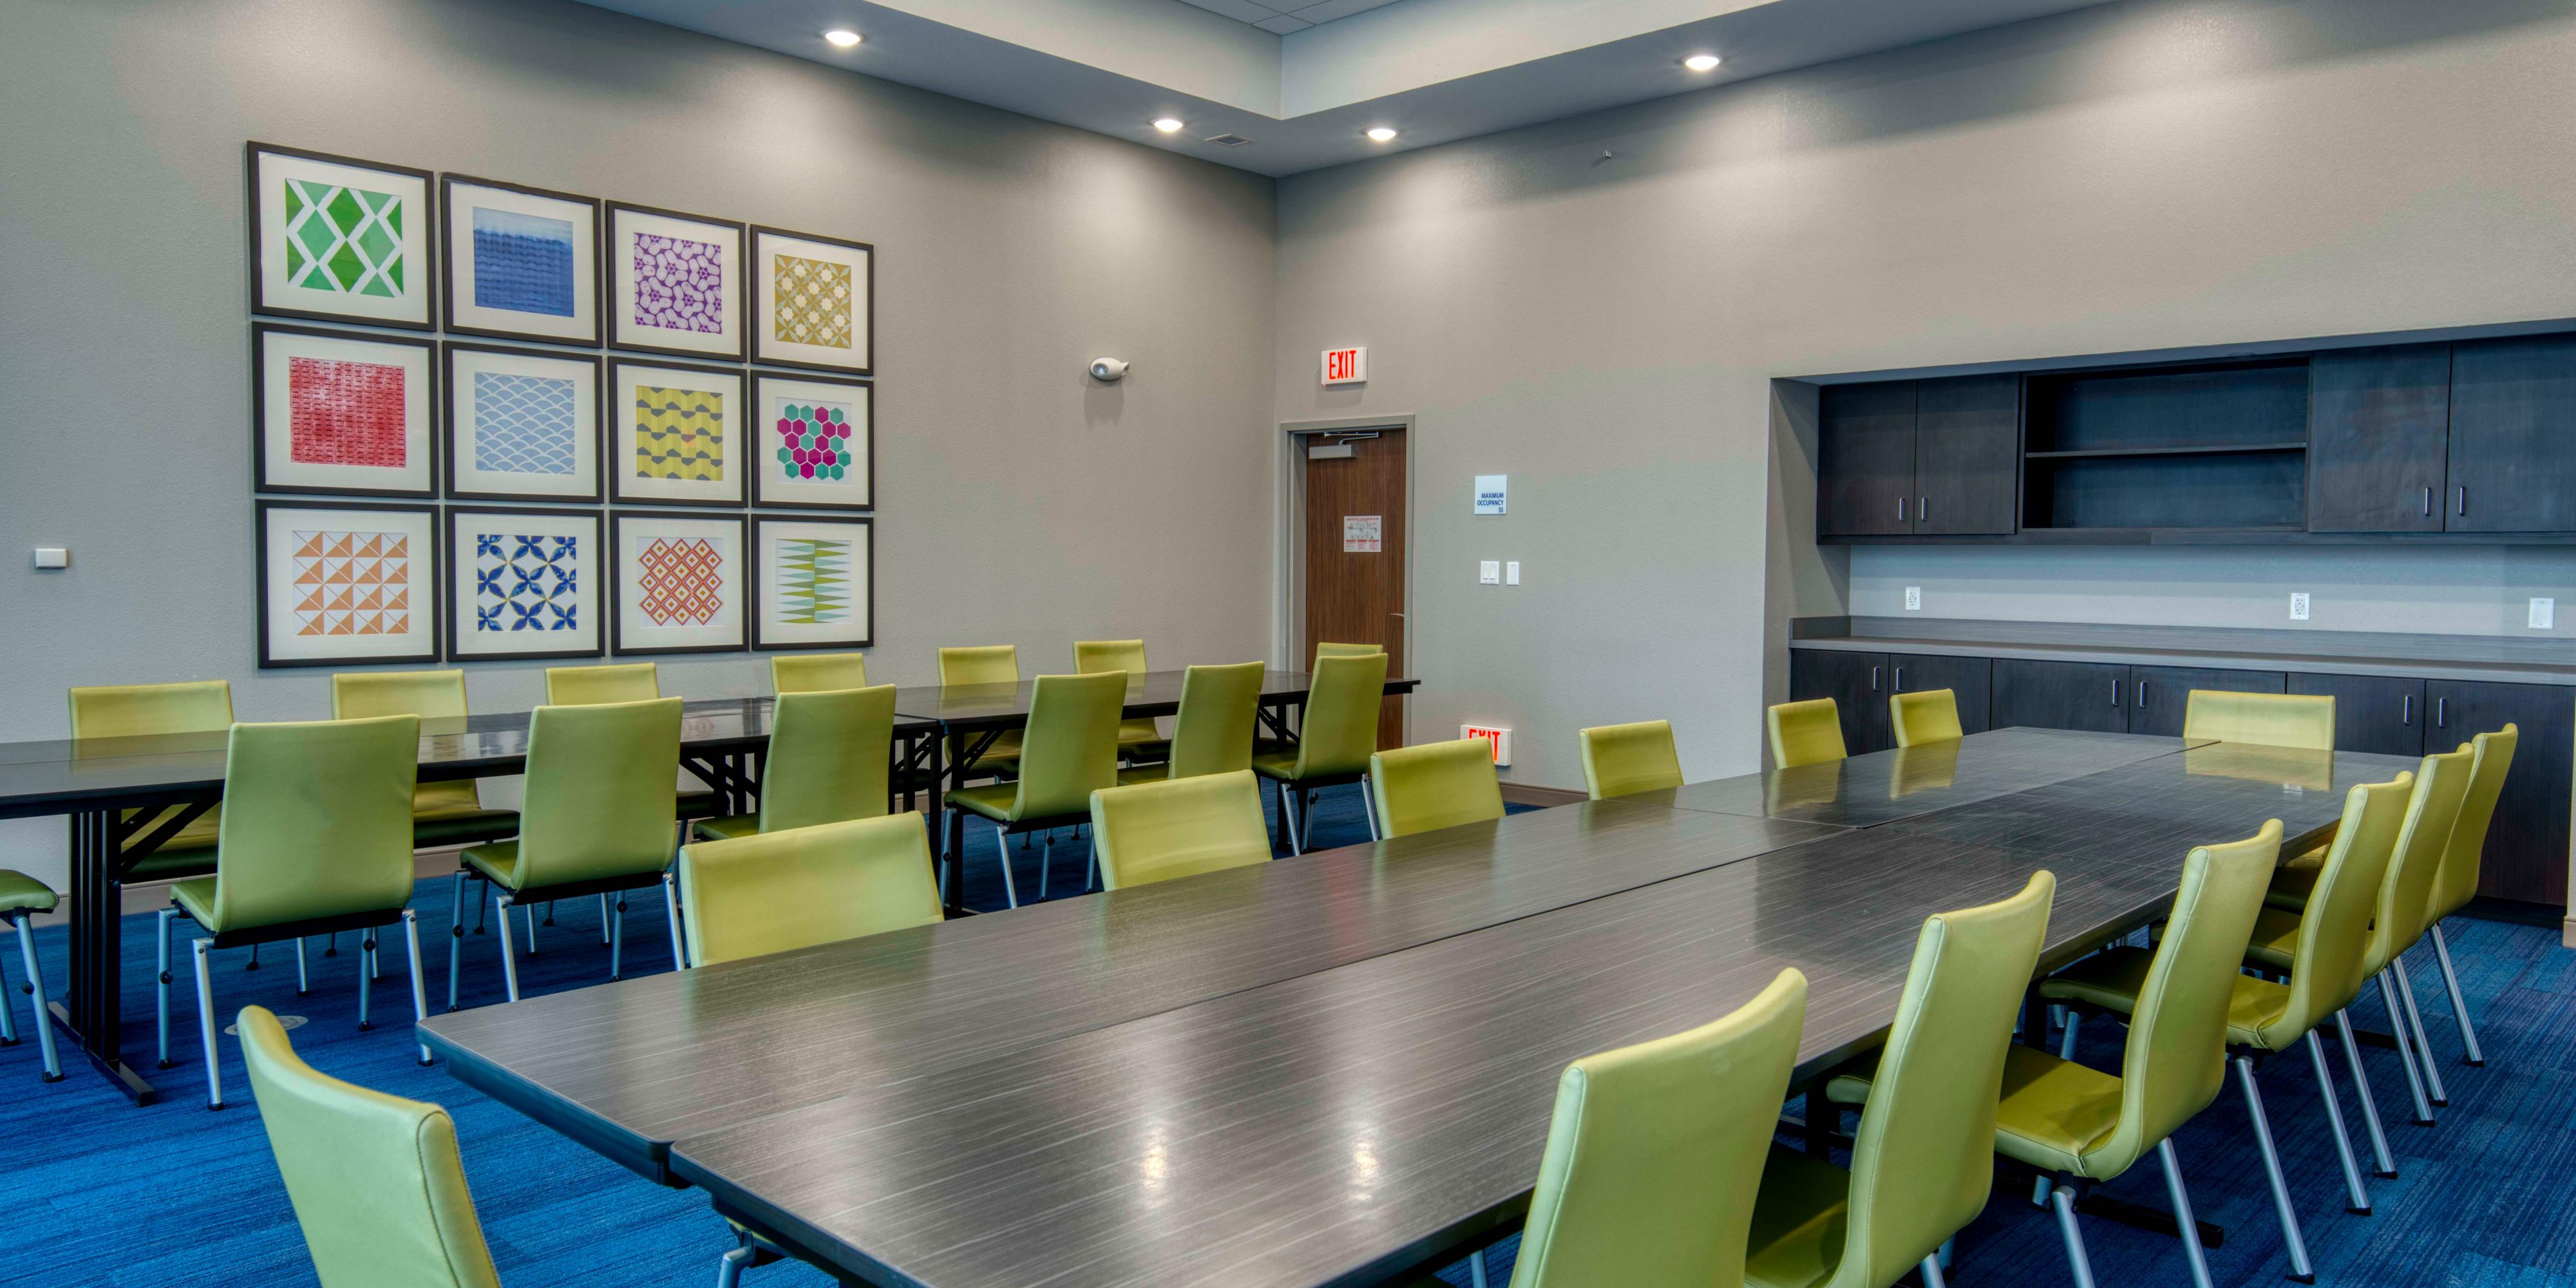 Small meetings play a vital role in the success of many organizations. Are you planning a small corporate meeting, training, board retreat or brainstorming session? Our flexible meeting space is sure to lead to big ideas! Whether you're a group of 5 or 40, we can help! Our Director of Sales is dedicated to making your meeting a huge success!